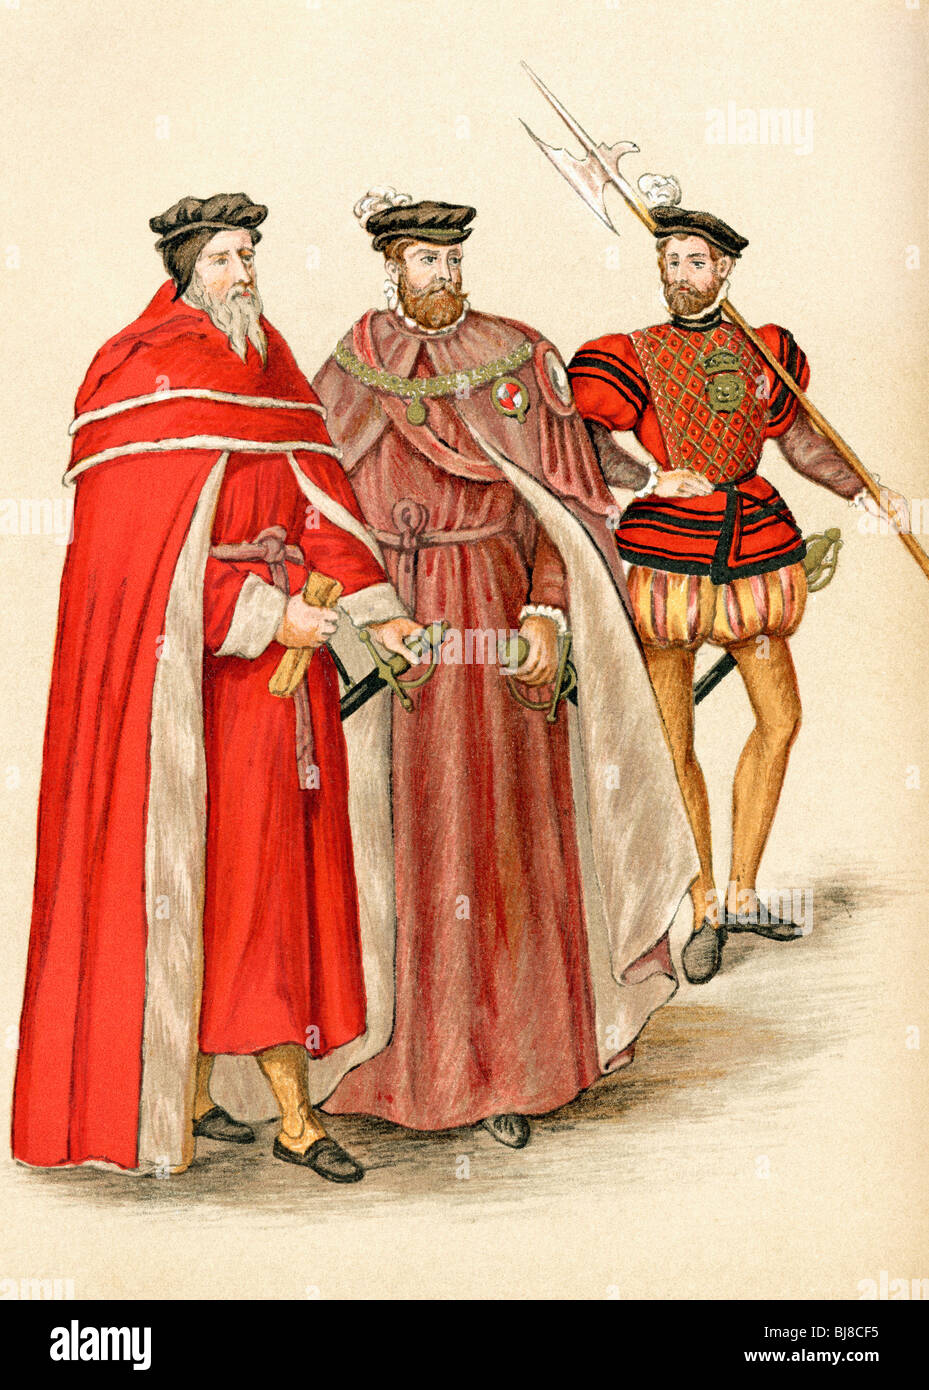 Two Peers in their robes, and a Halberdier during the Elizabethan era. Stock Photo